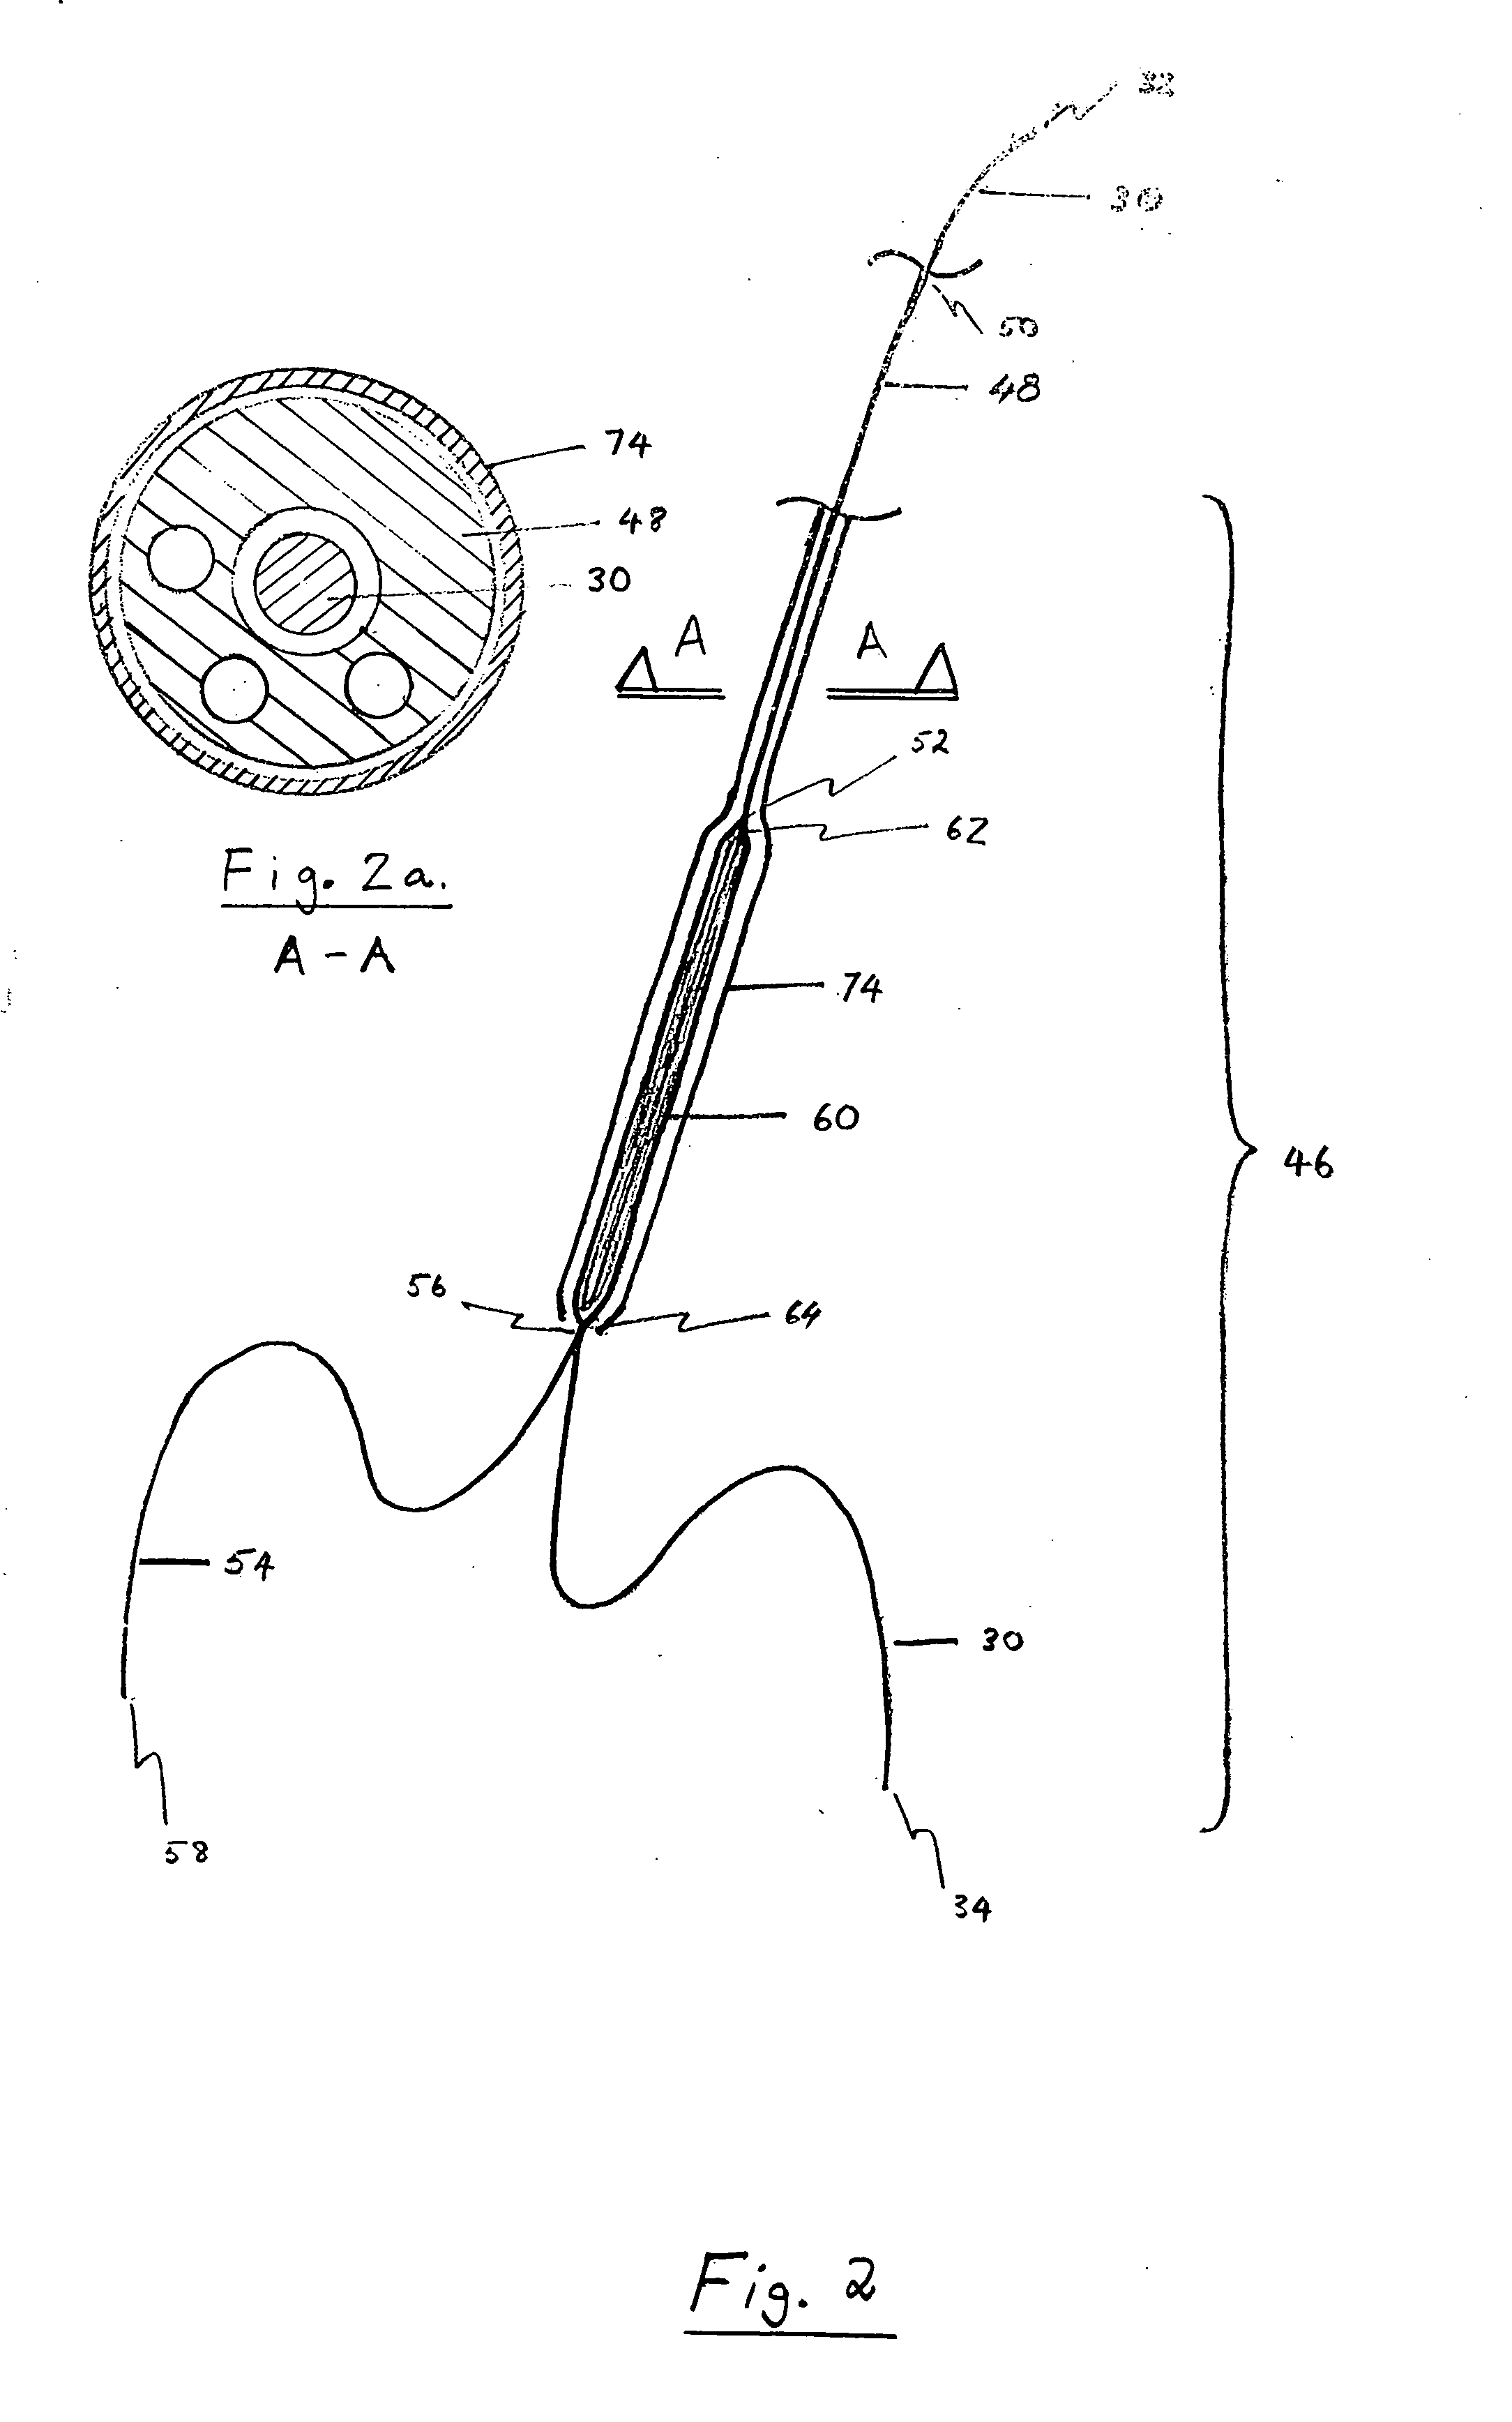 Device and method for staged implantation of a graft for vascular repair